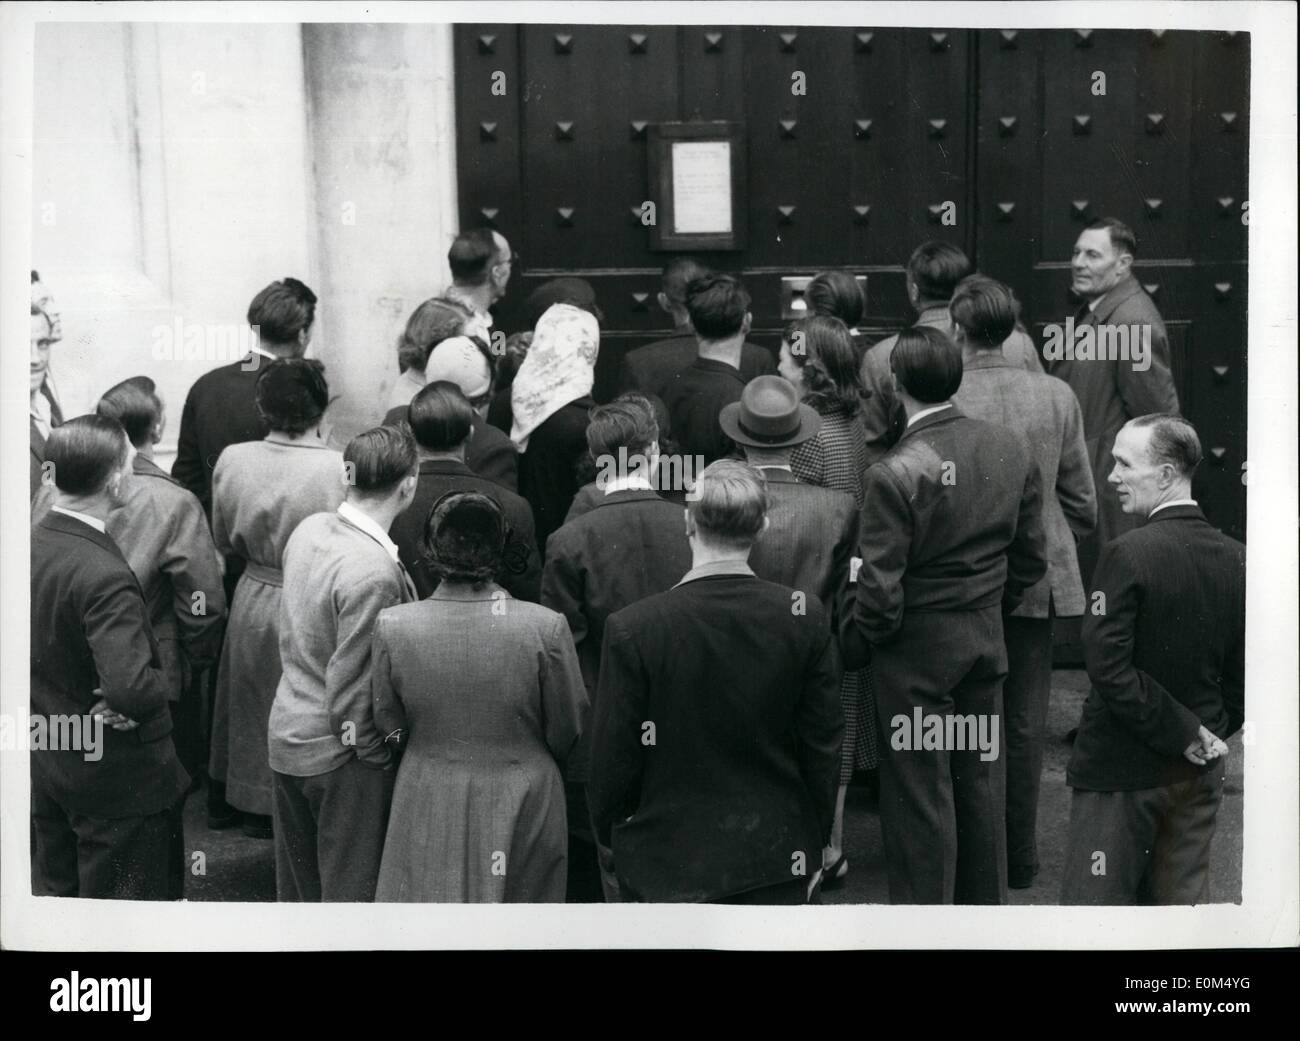 Jul. 07, 1953 - Pre-Execution Scene Outside Pentonville John Christie Dies: Photo Shows Looking down on the onlookers awaiting outside Pentonville Prison this morning - prior to the execution of John Christie. Stock Photo